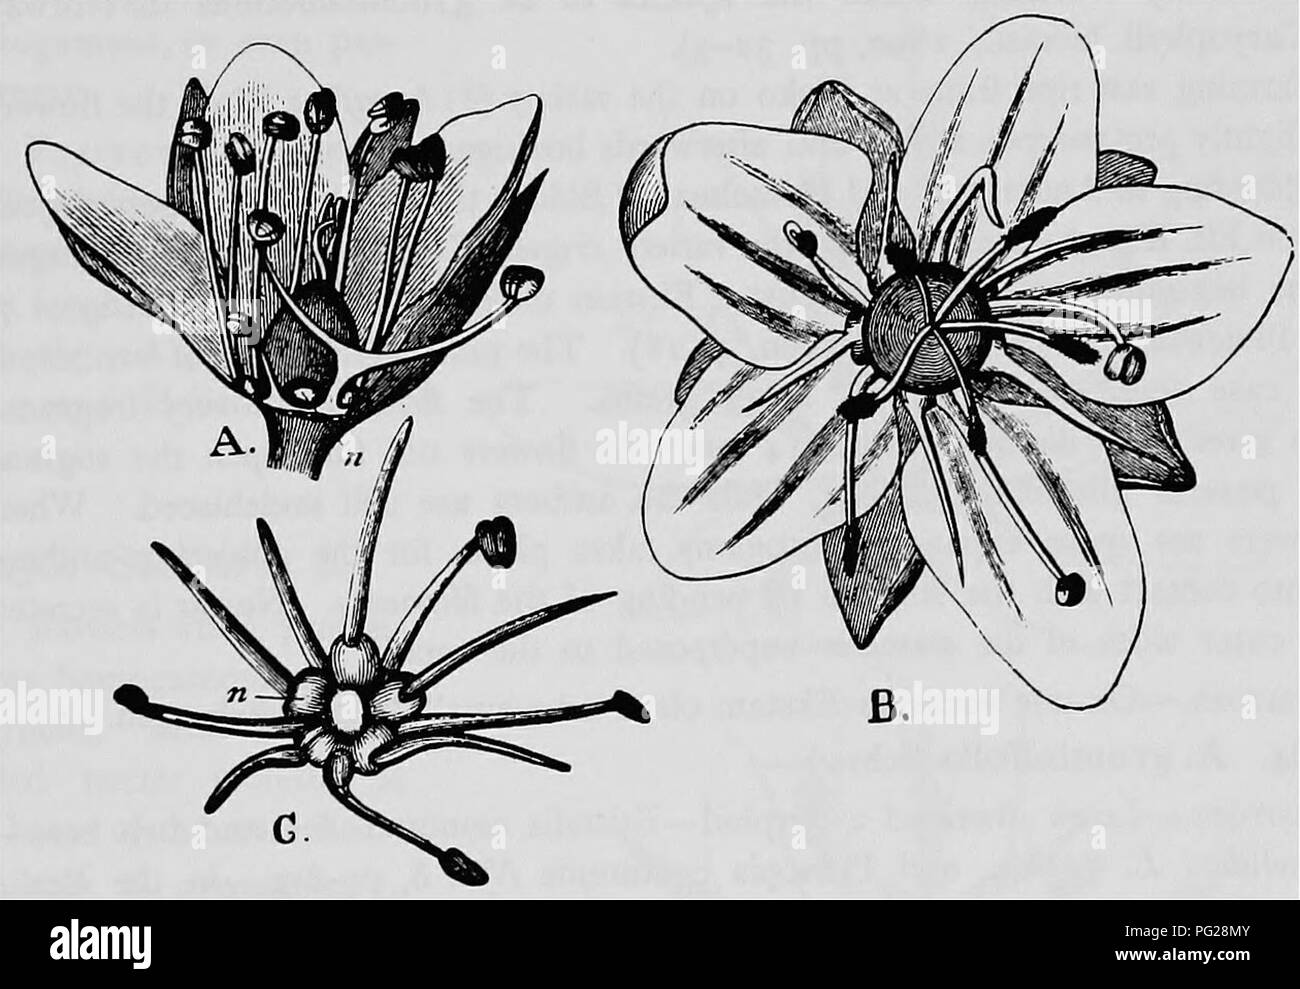 . Handbook of flower pollination : based upon Hermann Mu?ller's work 'The fertilisation of flowers by insects' . Fertilization of plants. CARYOPHYLLEAE 133. Krascheninikovia Turcz. Kuhn states that cleistogamous flowers occur in this genus. 185 134. Arenaria L. Flowers small and white, homogamous or protandrous, with half-concealed nectar secreted in the usual place. 461. A. serpyllifolia L. (Herm. MuUer,' Weit. Beob.,' II, p. 226; MacLeod, Bot. Jaarb. Dodonaea, Ghent, vi, 1894, p. 161; Kirchner, 'Flora v. Stuttgart,' p. 754; Schulz, 'Beitrage,' I, p. 19, II, p. 47.)—In this species the stamen Stock Photo